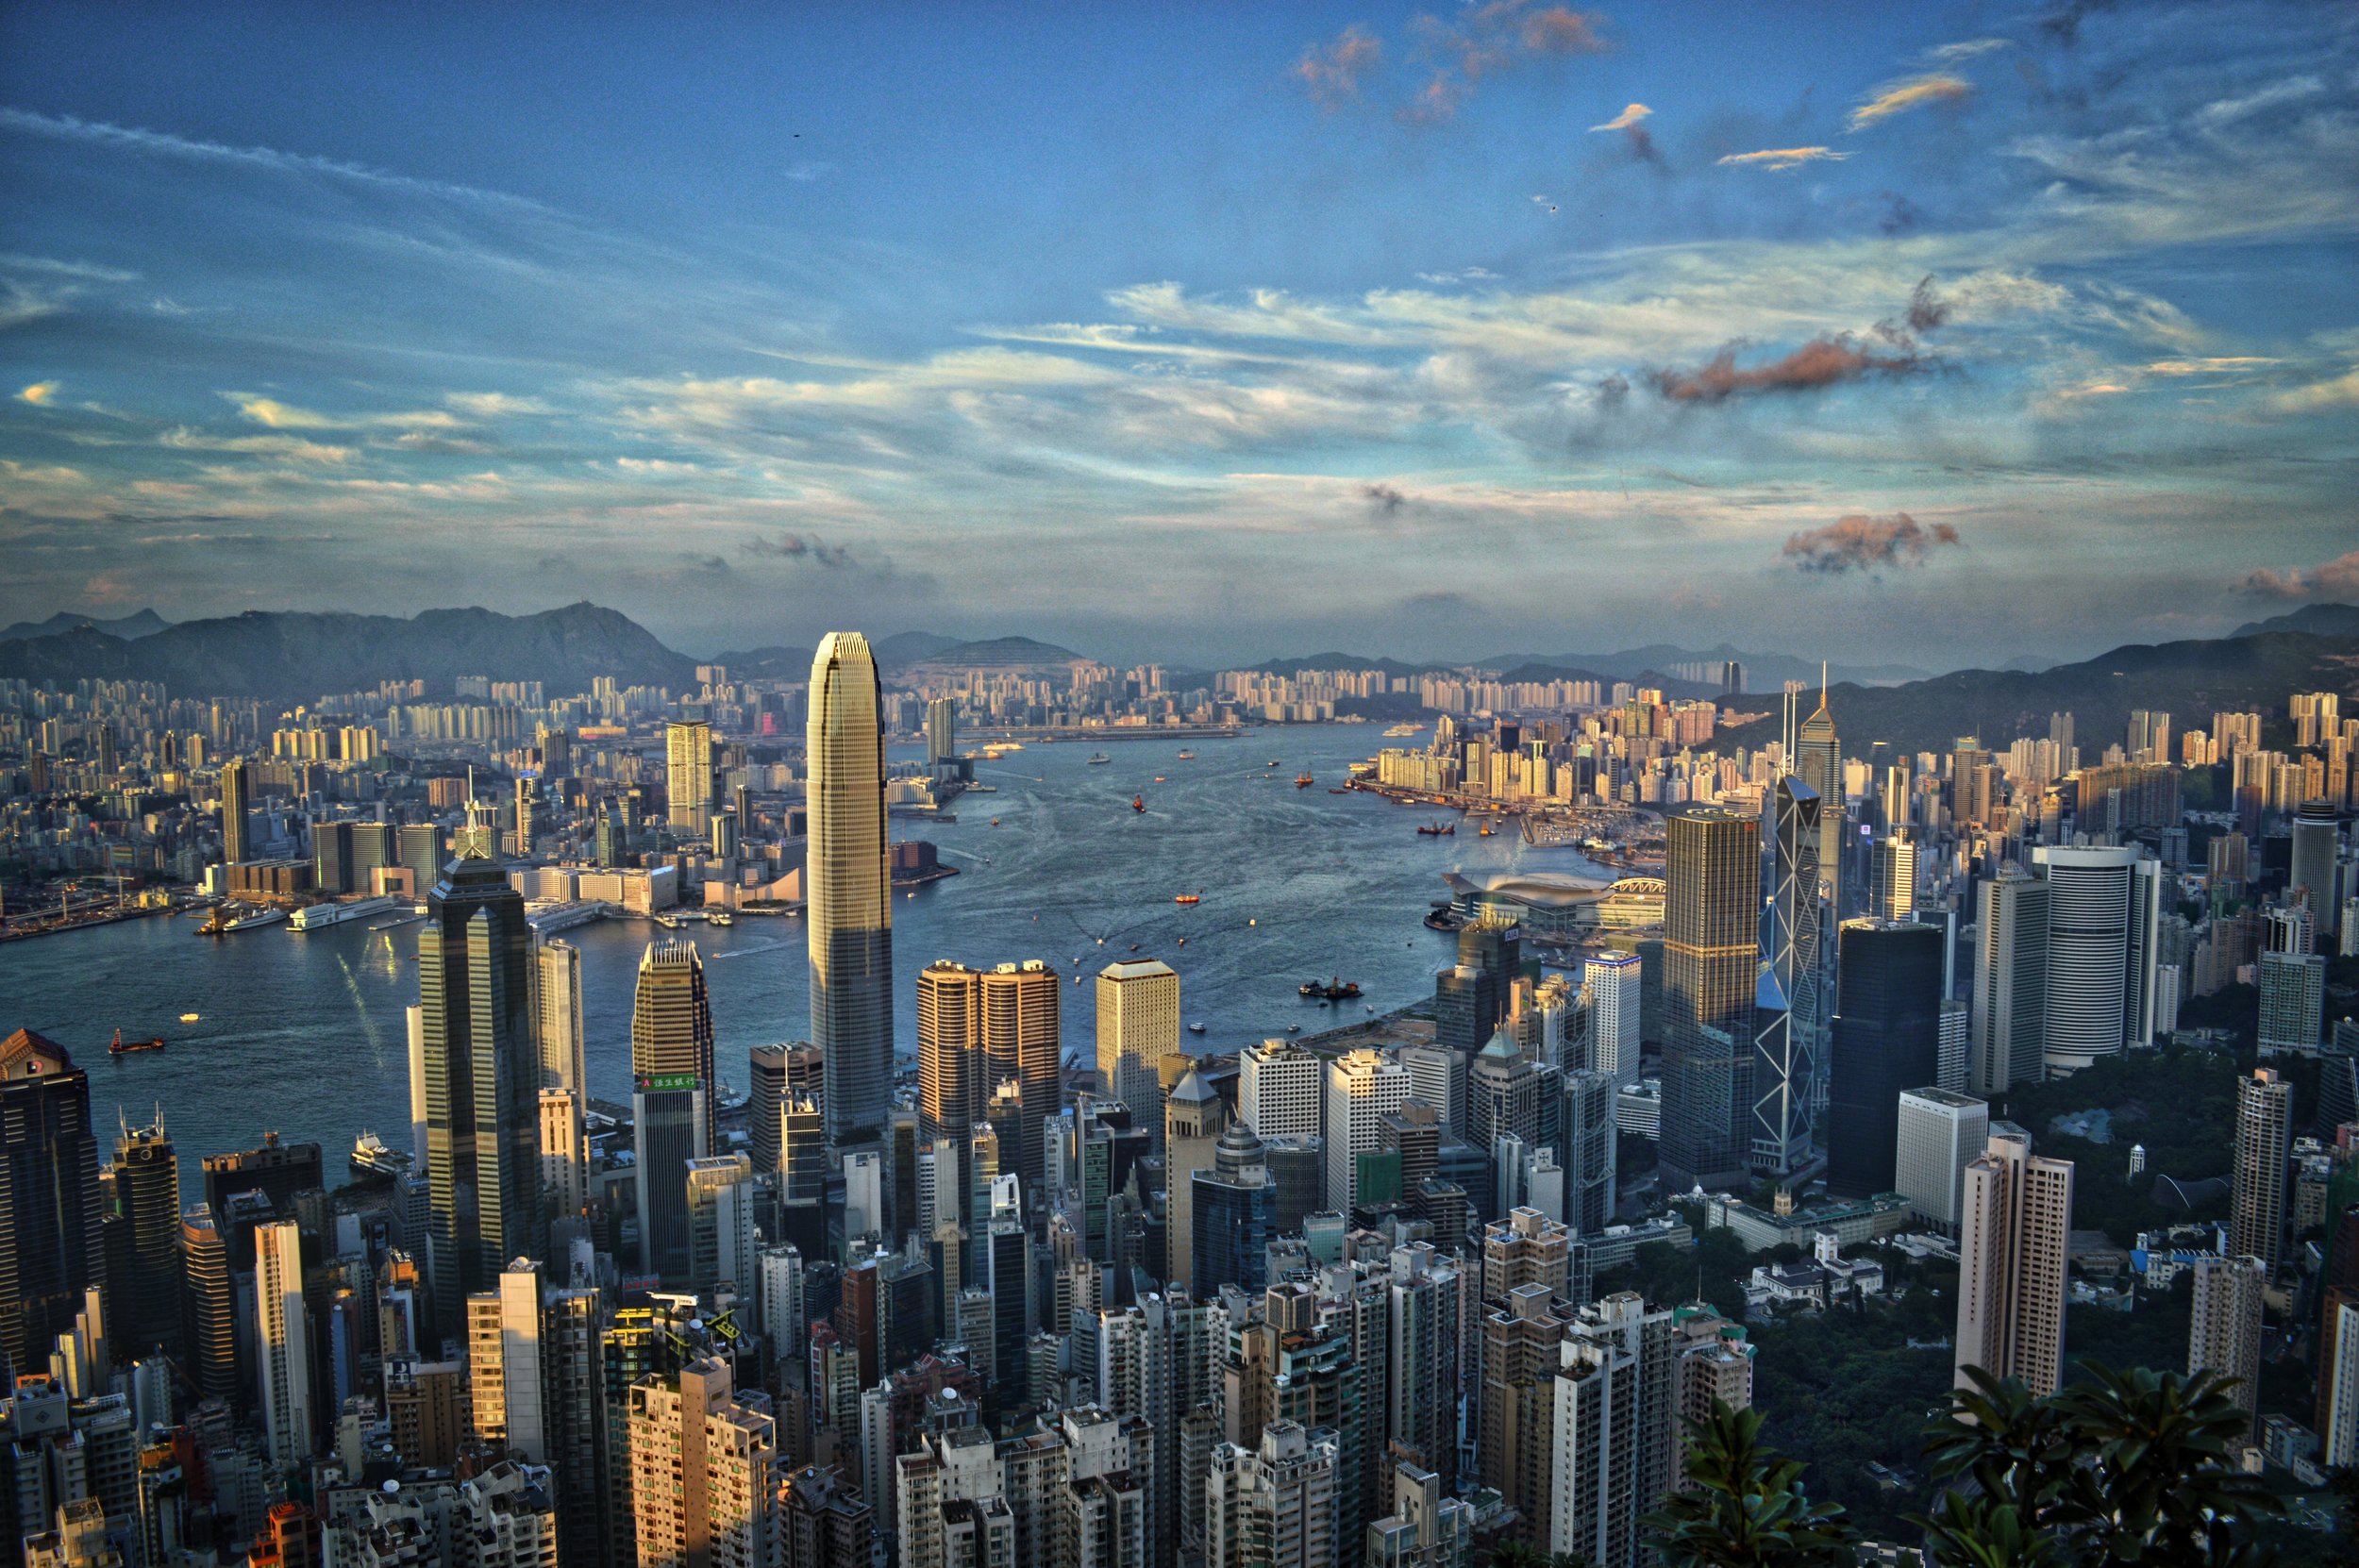 My favorite city in the world: Hong Kong